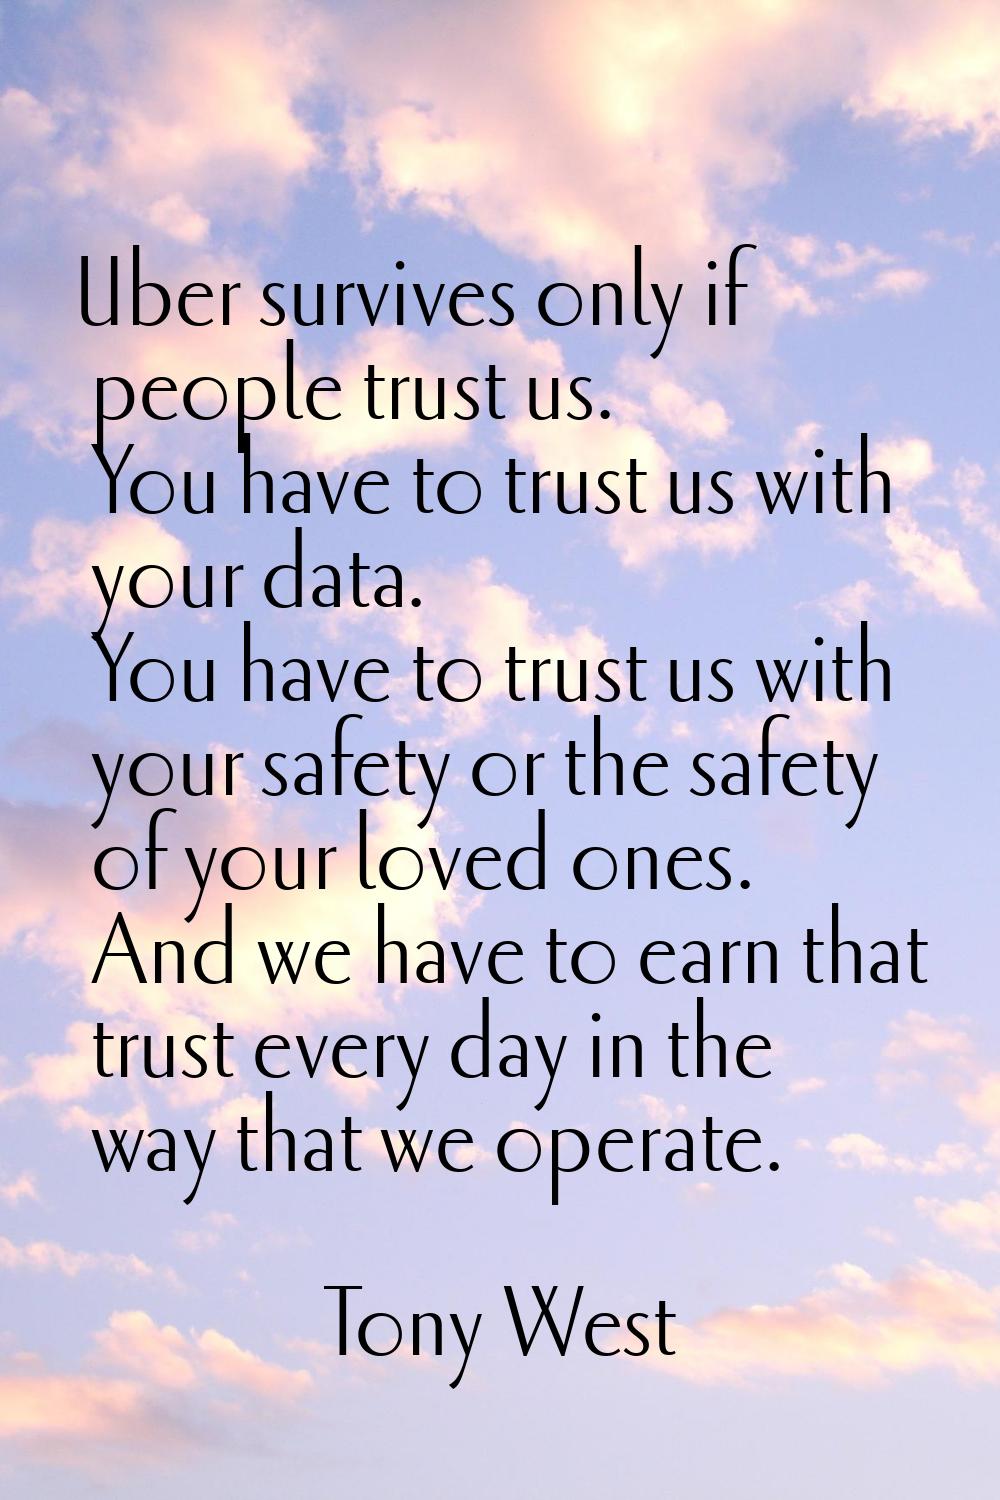 Uber survives only if people trust us. You have to trust us with your data. You have to trust us wi